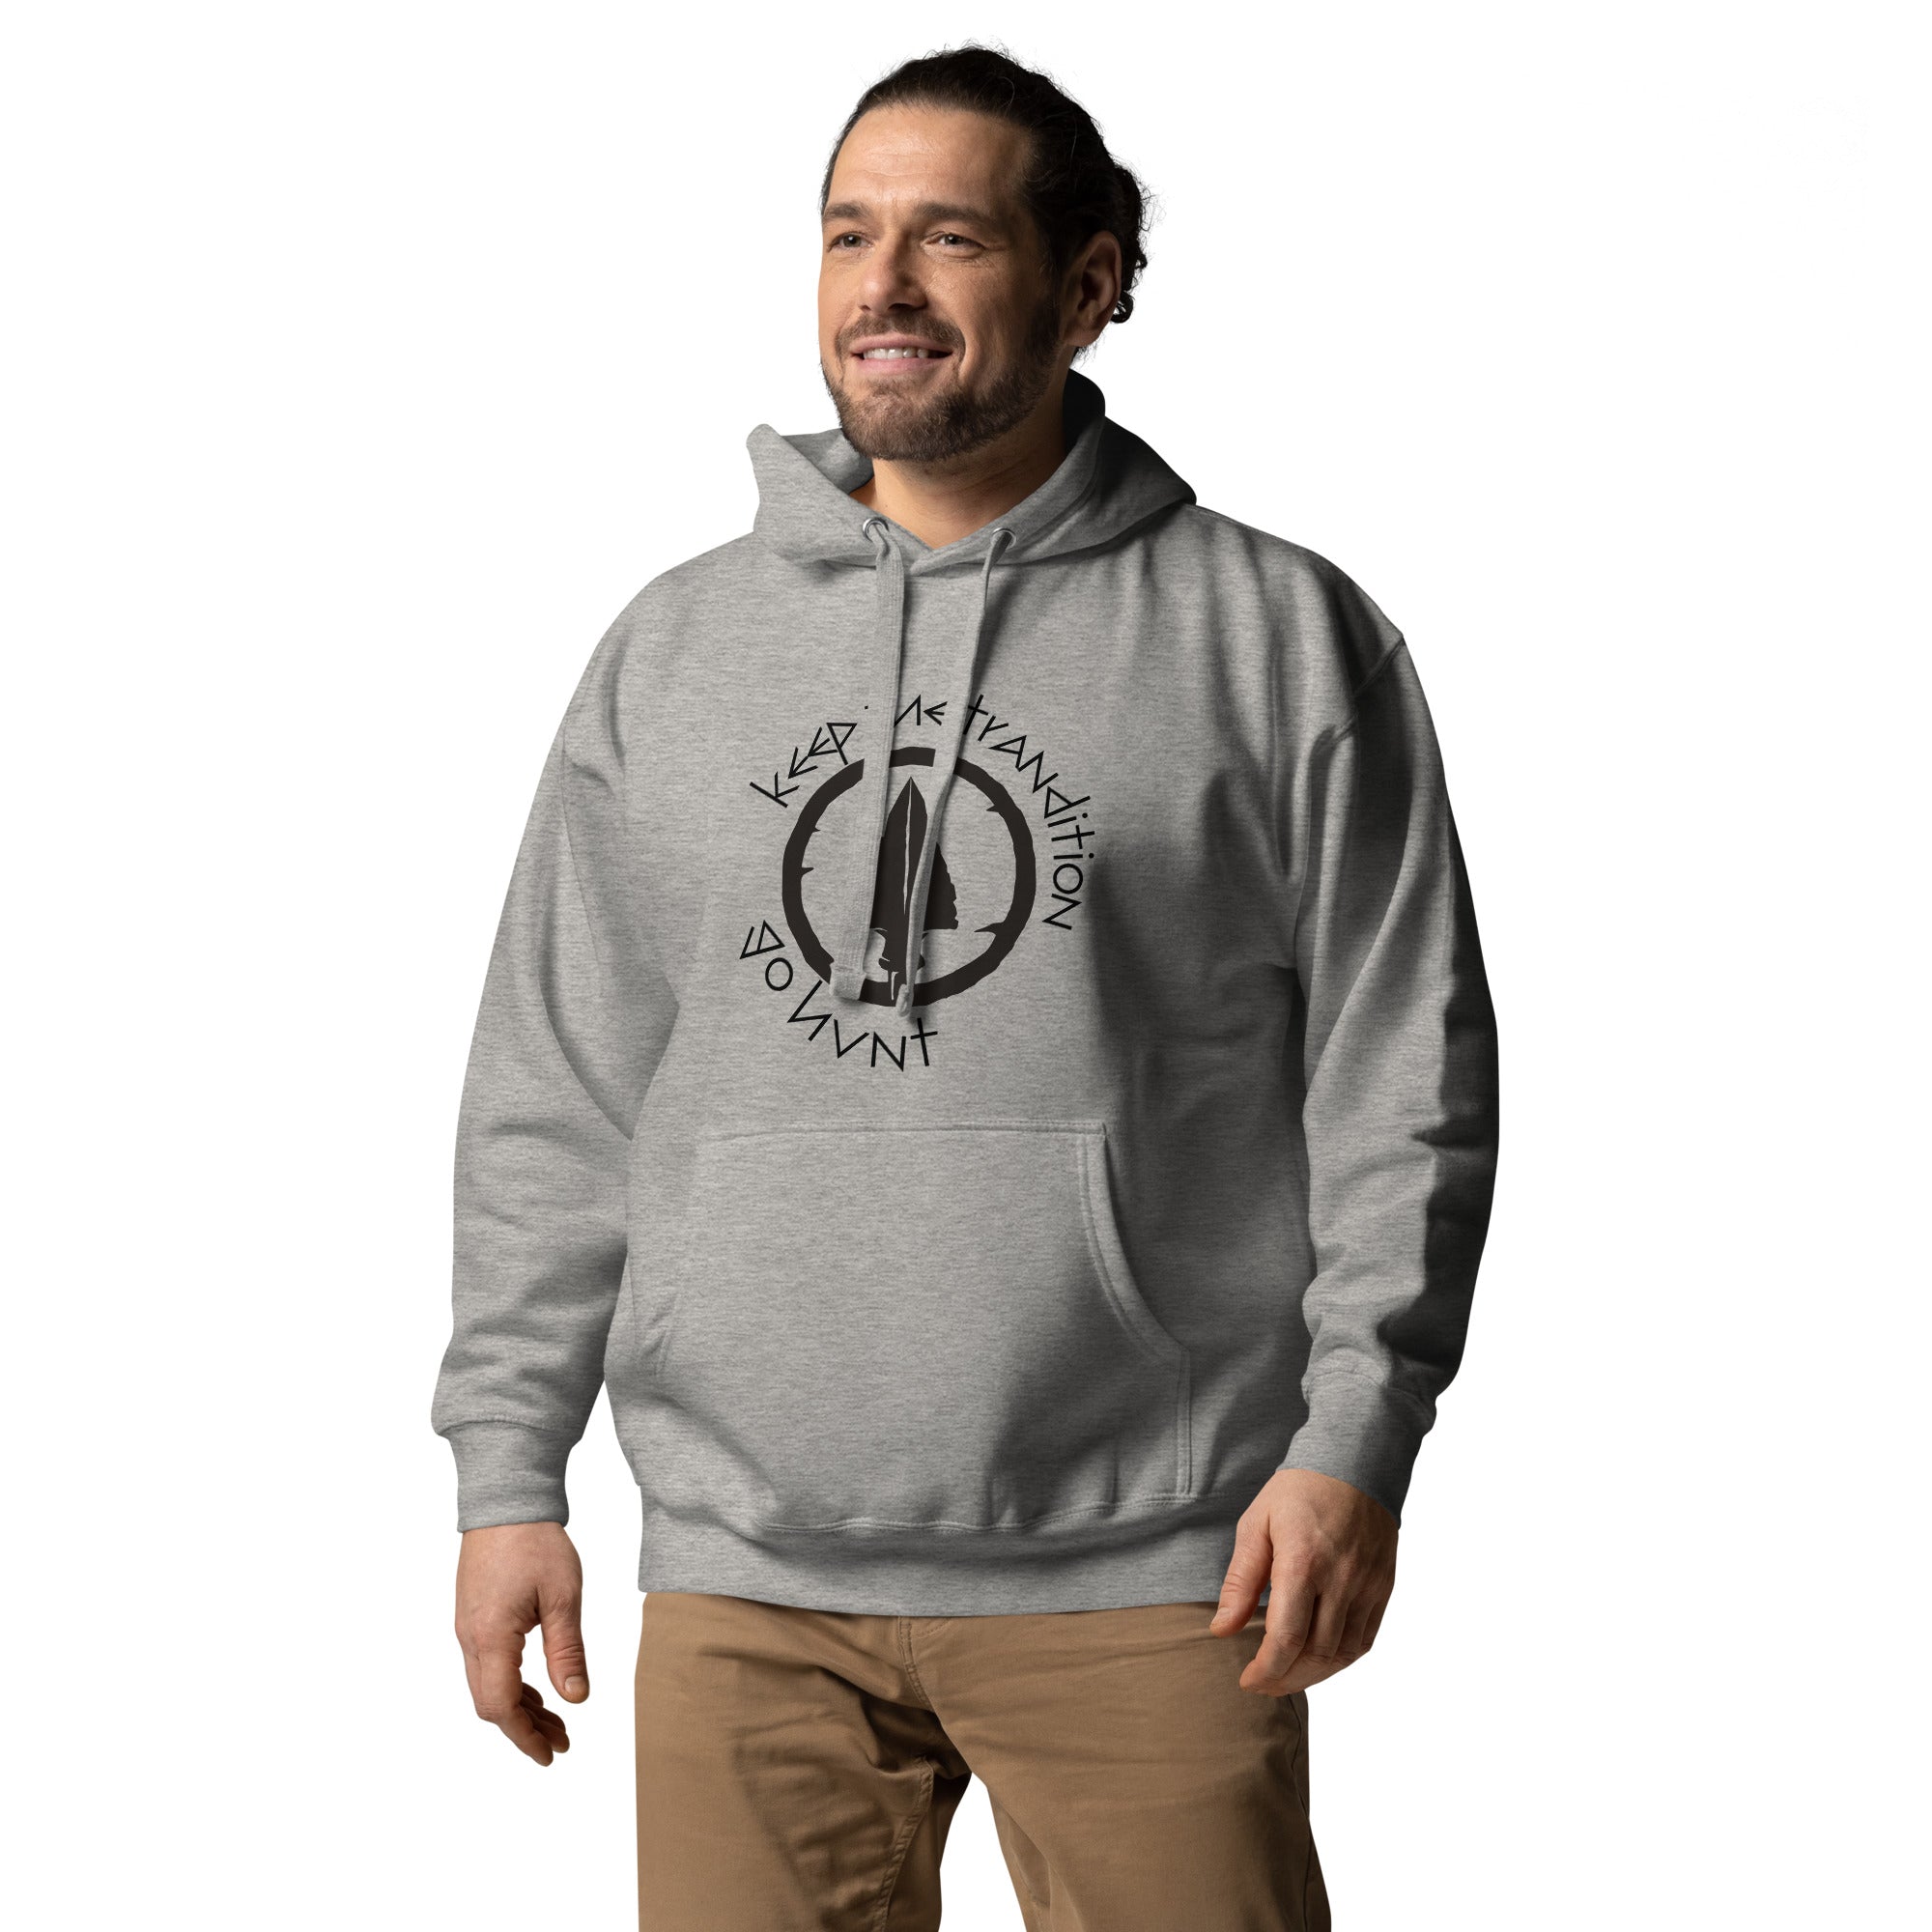 Keep The Tradition Men's Heavy Hoodie - Go Hunt